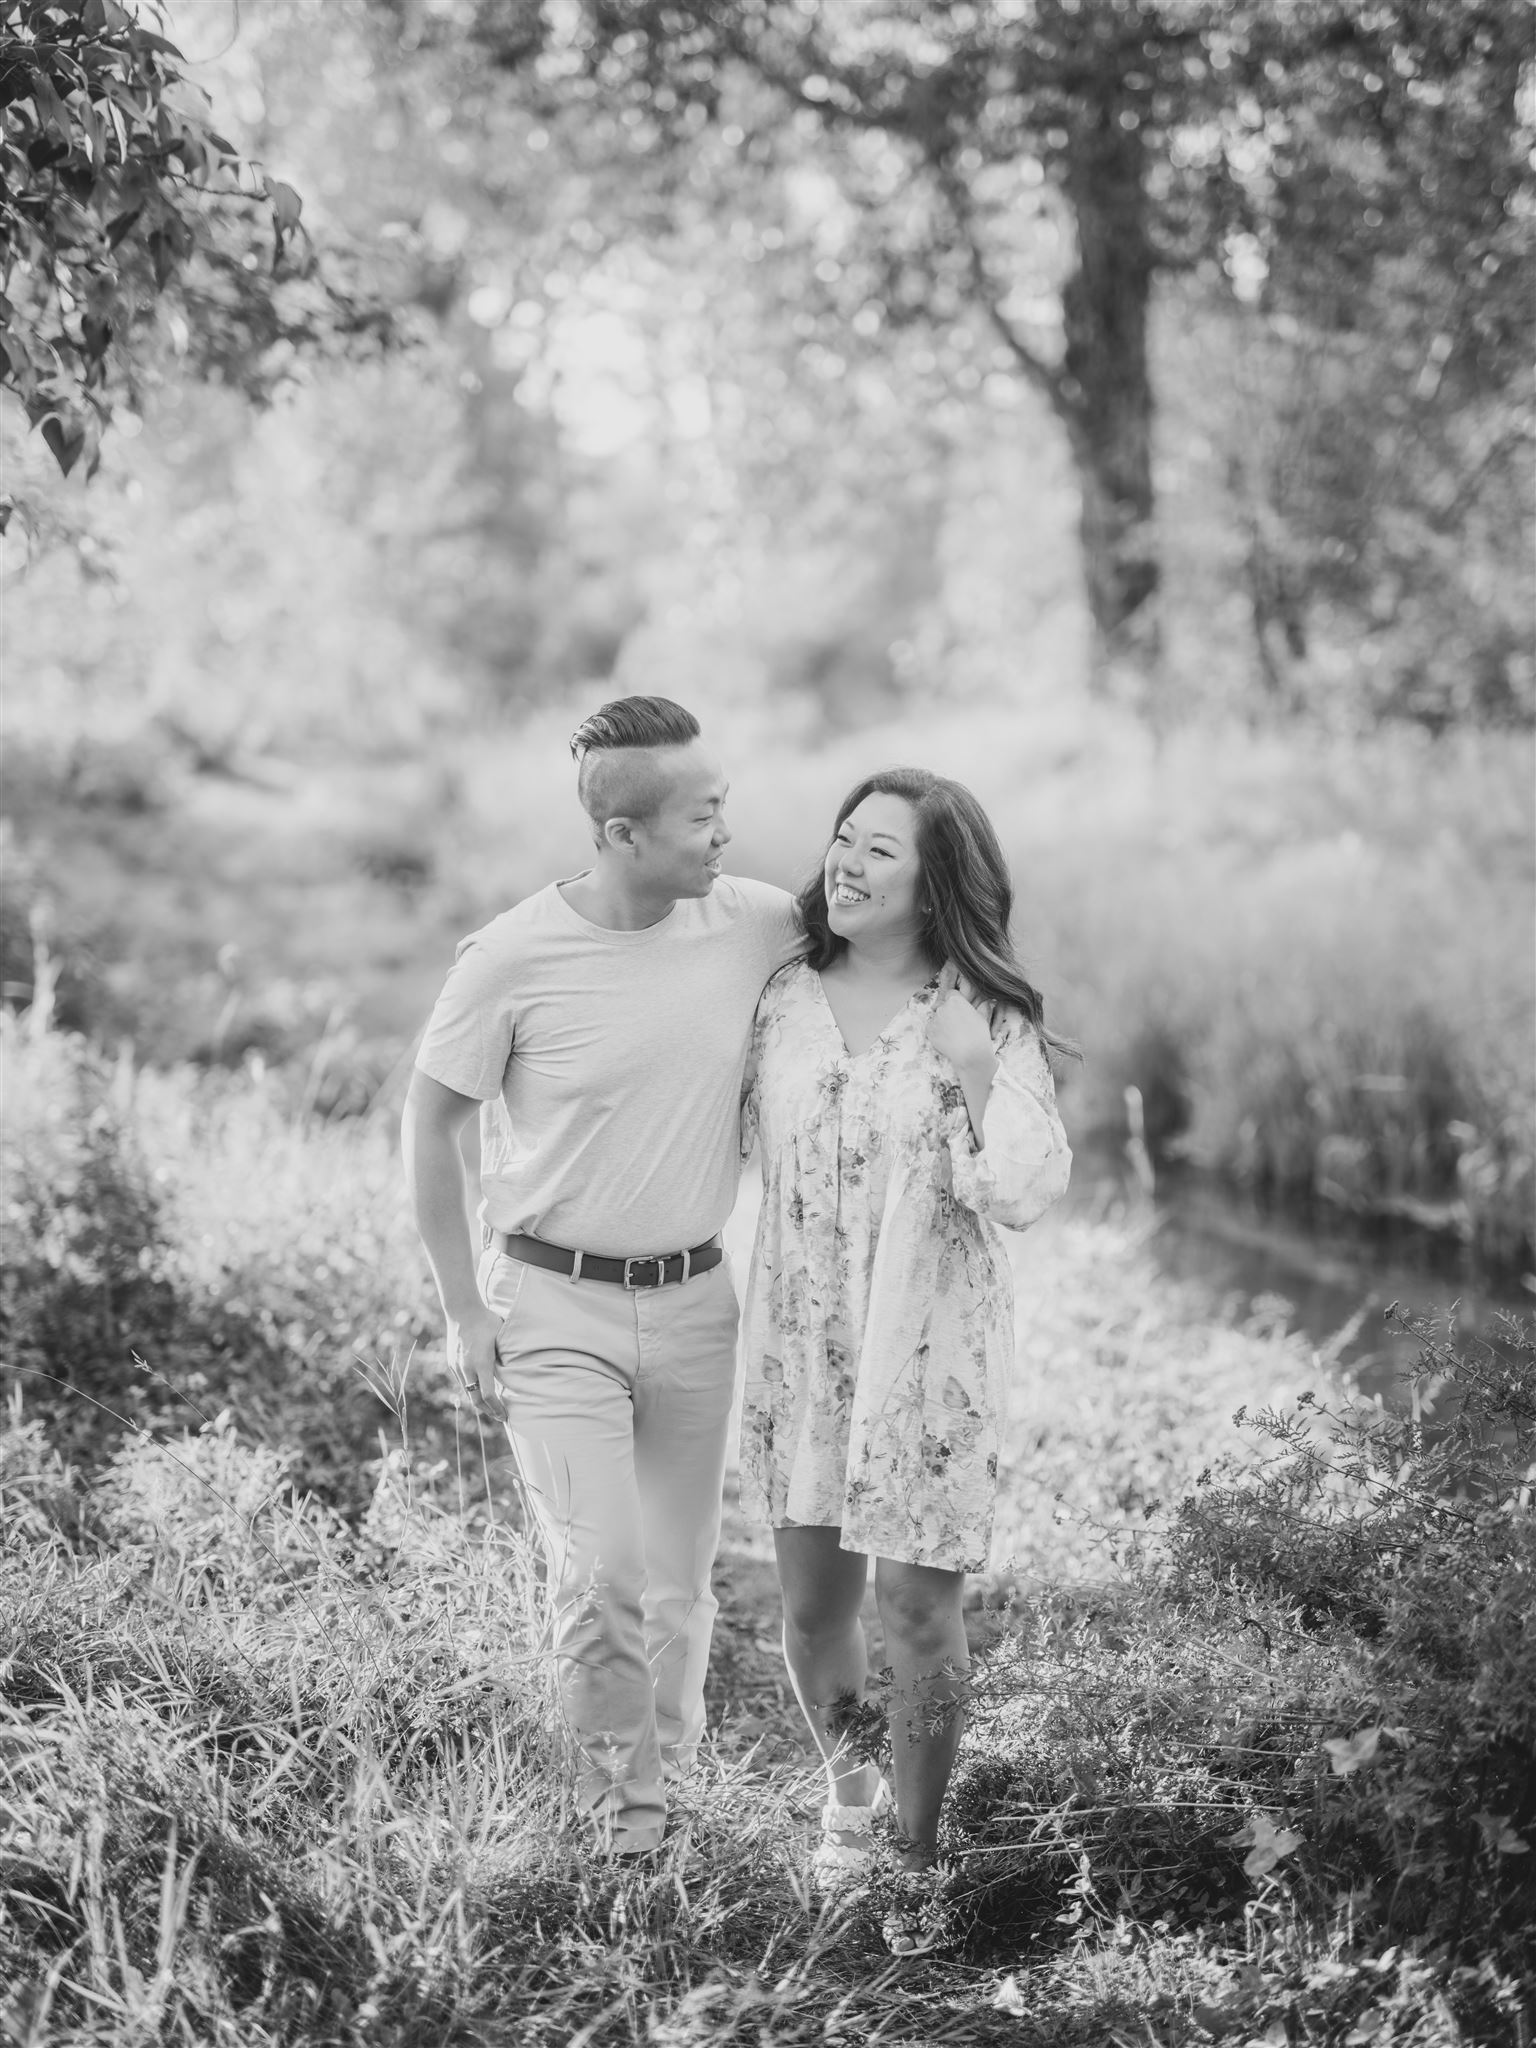 fun engagement poses, spring engagement, floral engagement dress, flower engagement dress, sunset engagement, editorial engagement photos, film engagement, film photography, best wedding photographers canada, flirty engagement poses